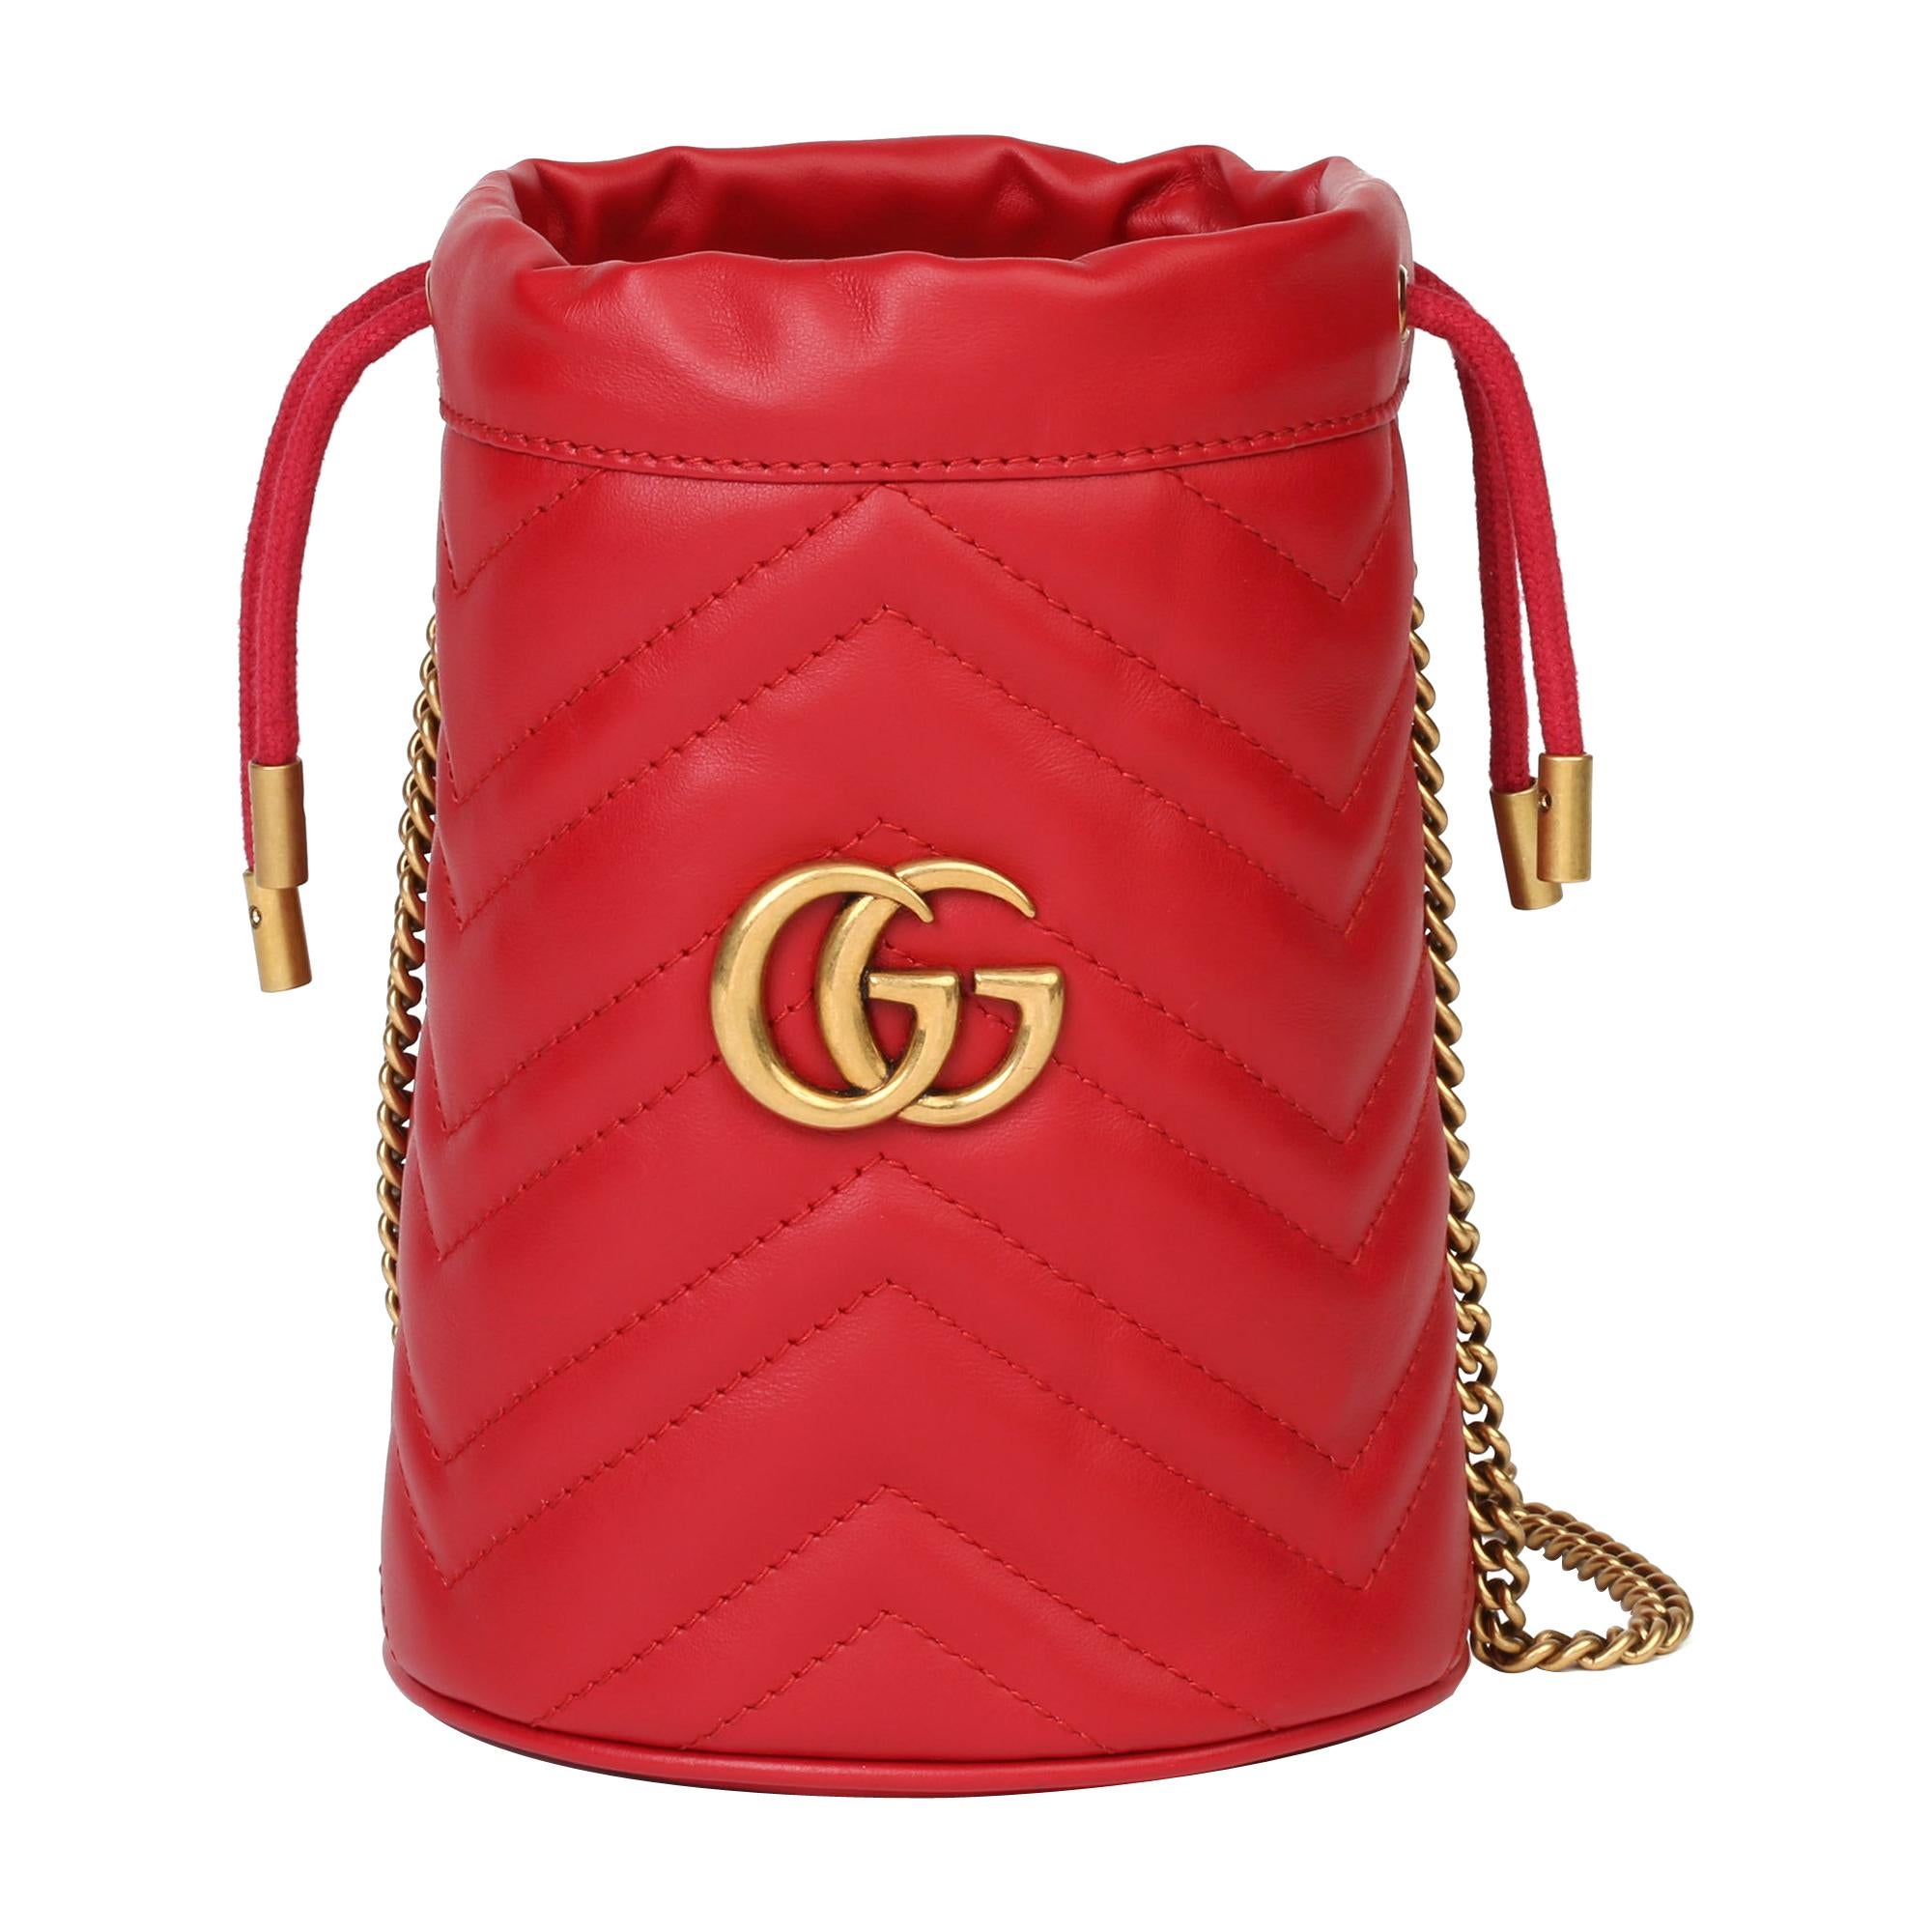 2021 Gucci Red Quilted Calfskin Leather Mini Marmont Bucket Bag